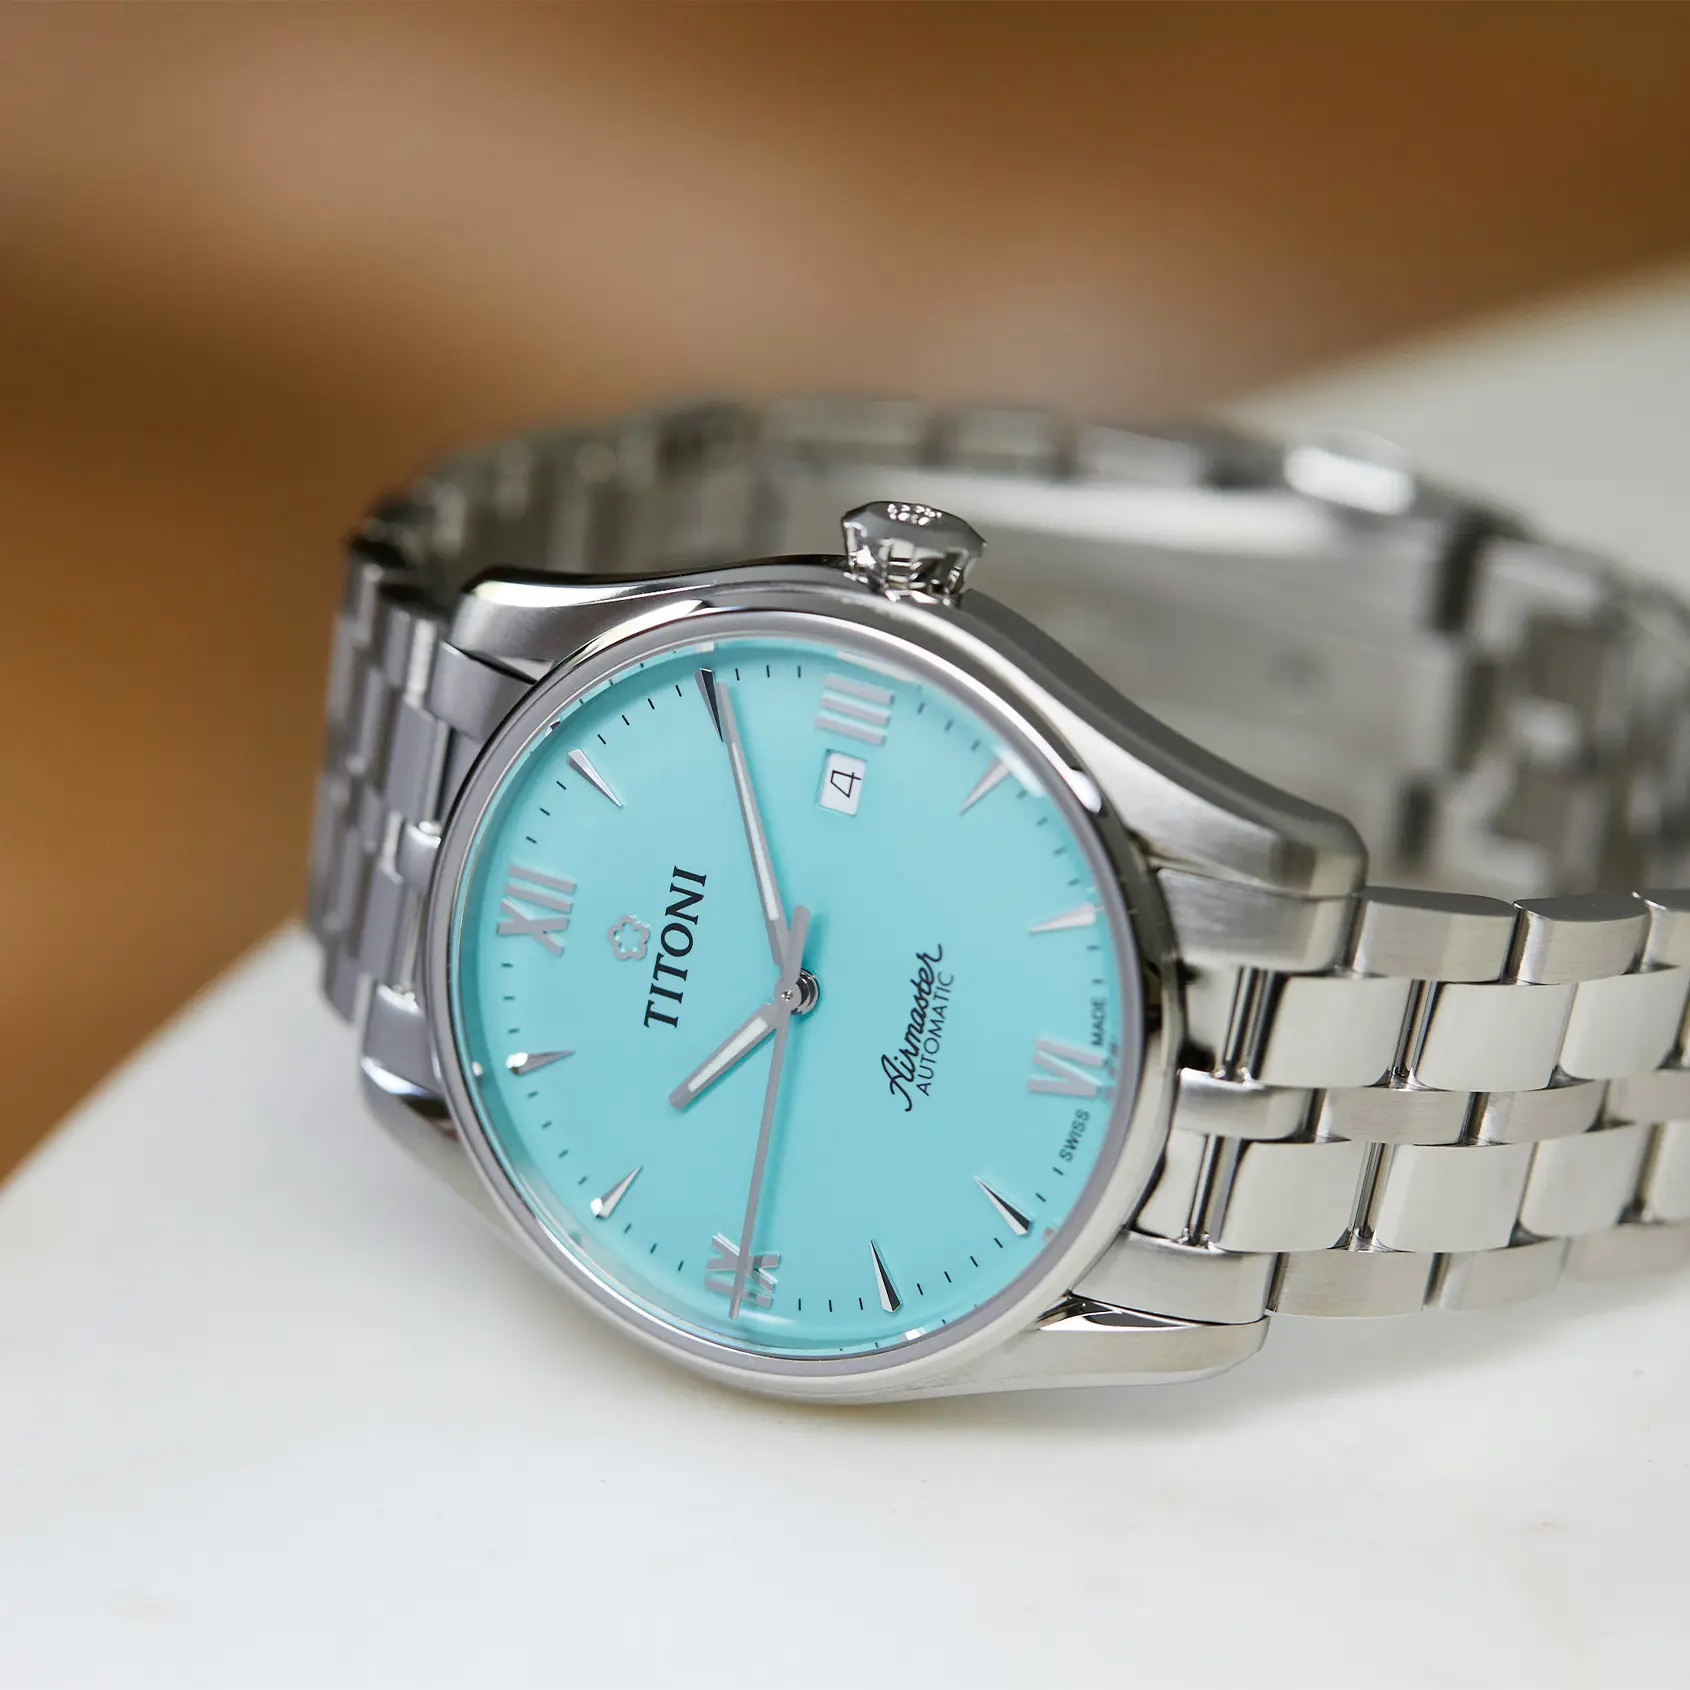 HANDS-ON: The Titoni Airmaster